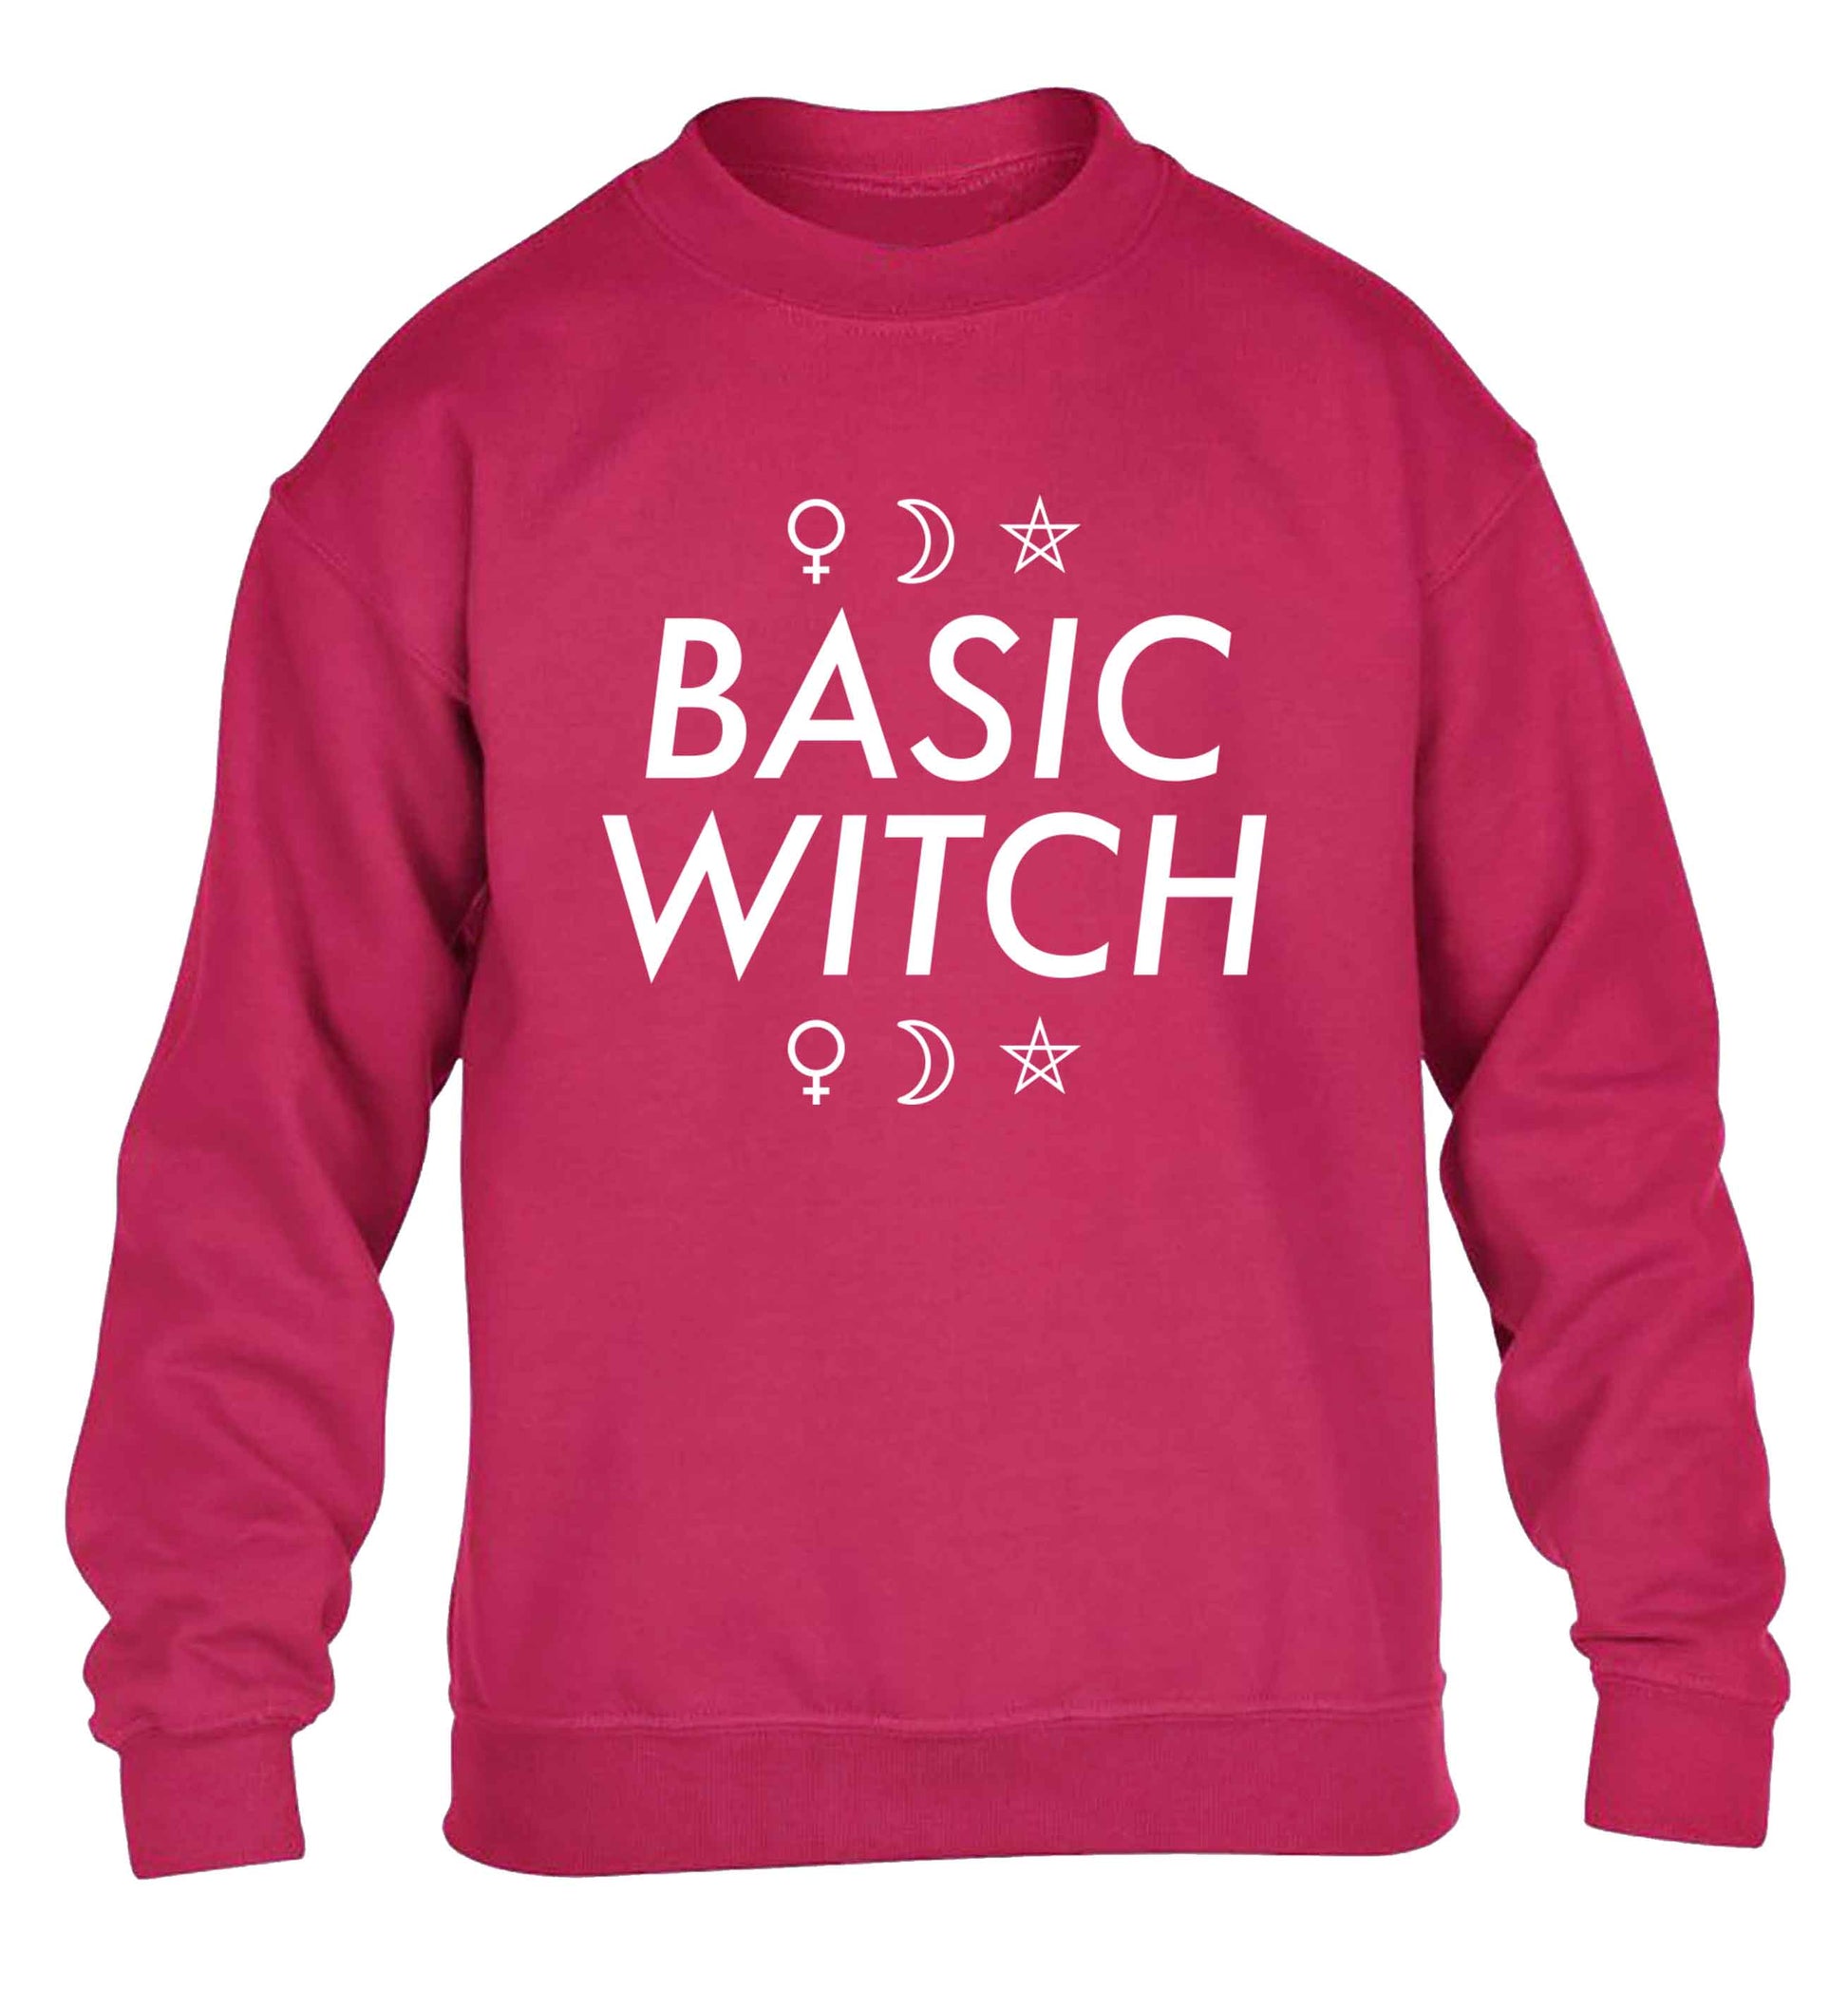 Basic witch 1 children's pink sweater 12-13 Years